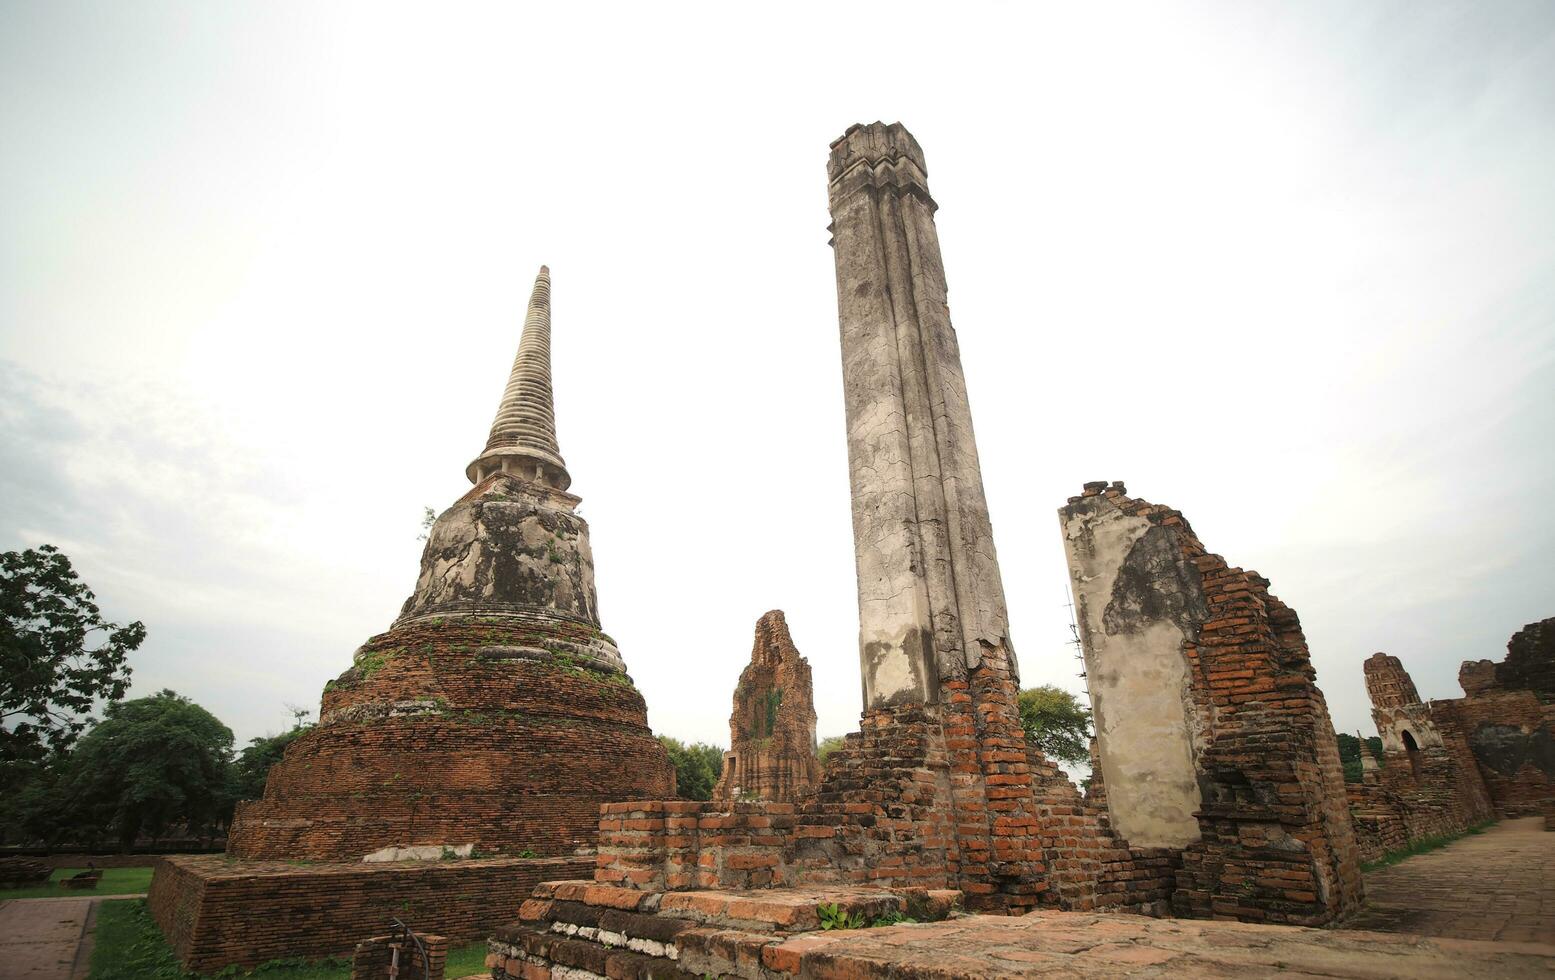 Landscape Historical Park in Ayutthaya. The ancient temple that presents humans is located in Thailand's Ayuddhaya Historic City. Ayutthaya World Heritage. photo